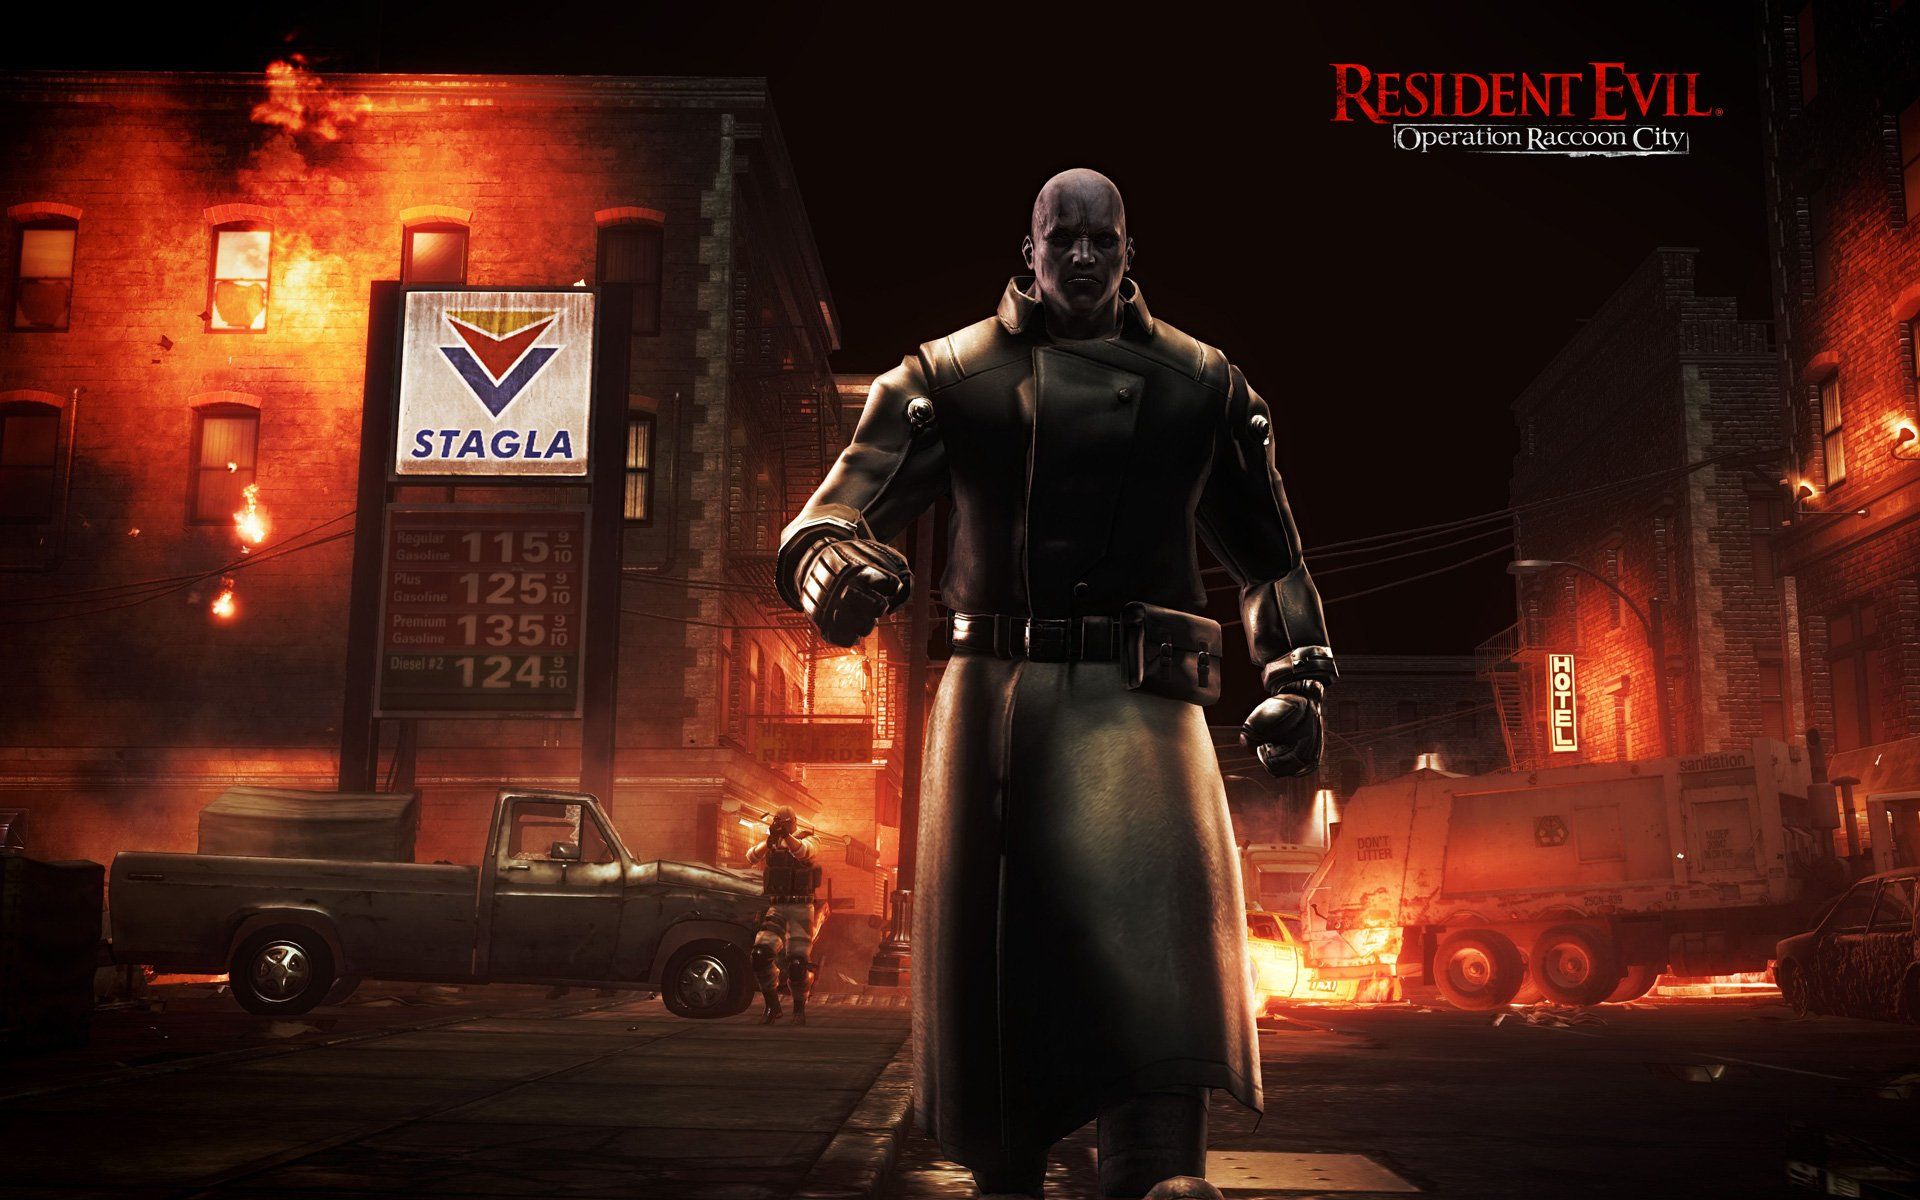 Resident Evil: Operation Raccoon City HD Wallpaper. Background